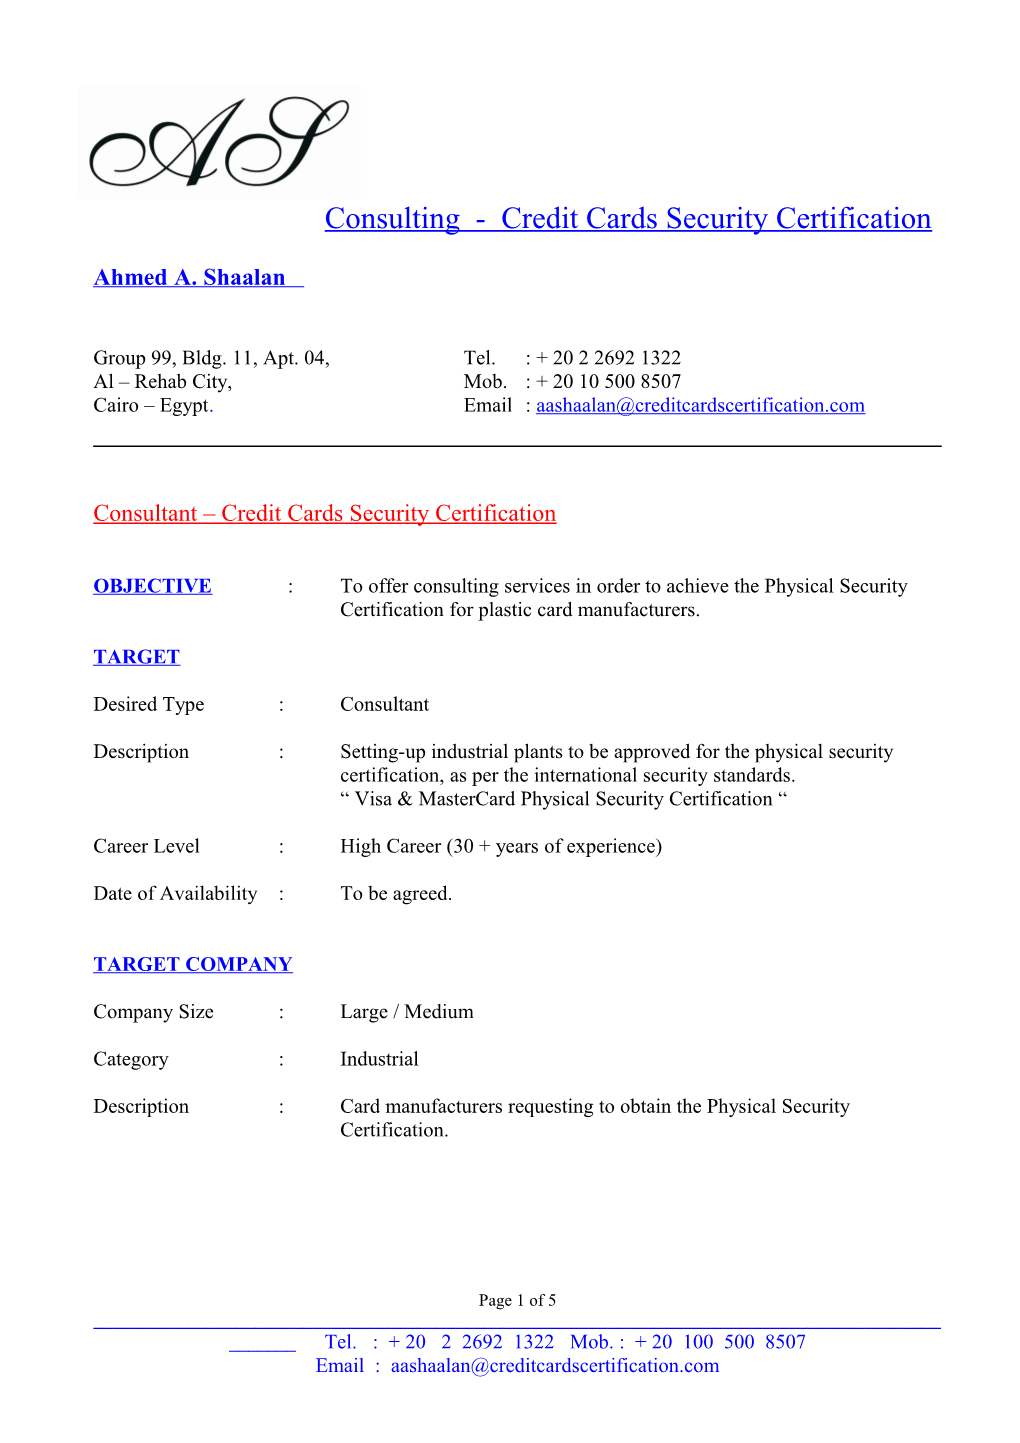 Consulting - Credit Cards Security Certification